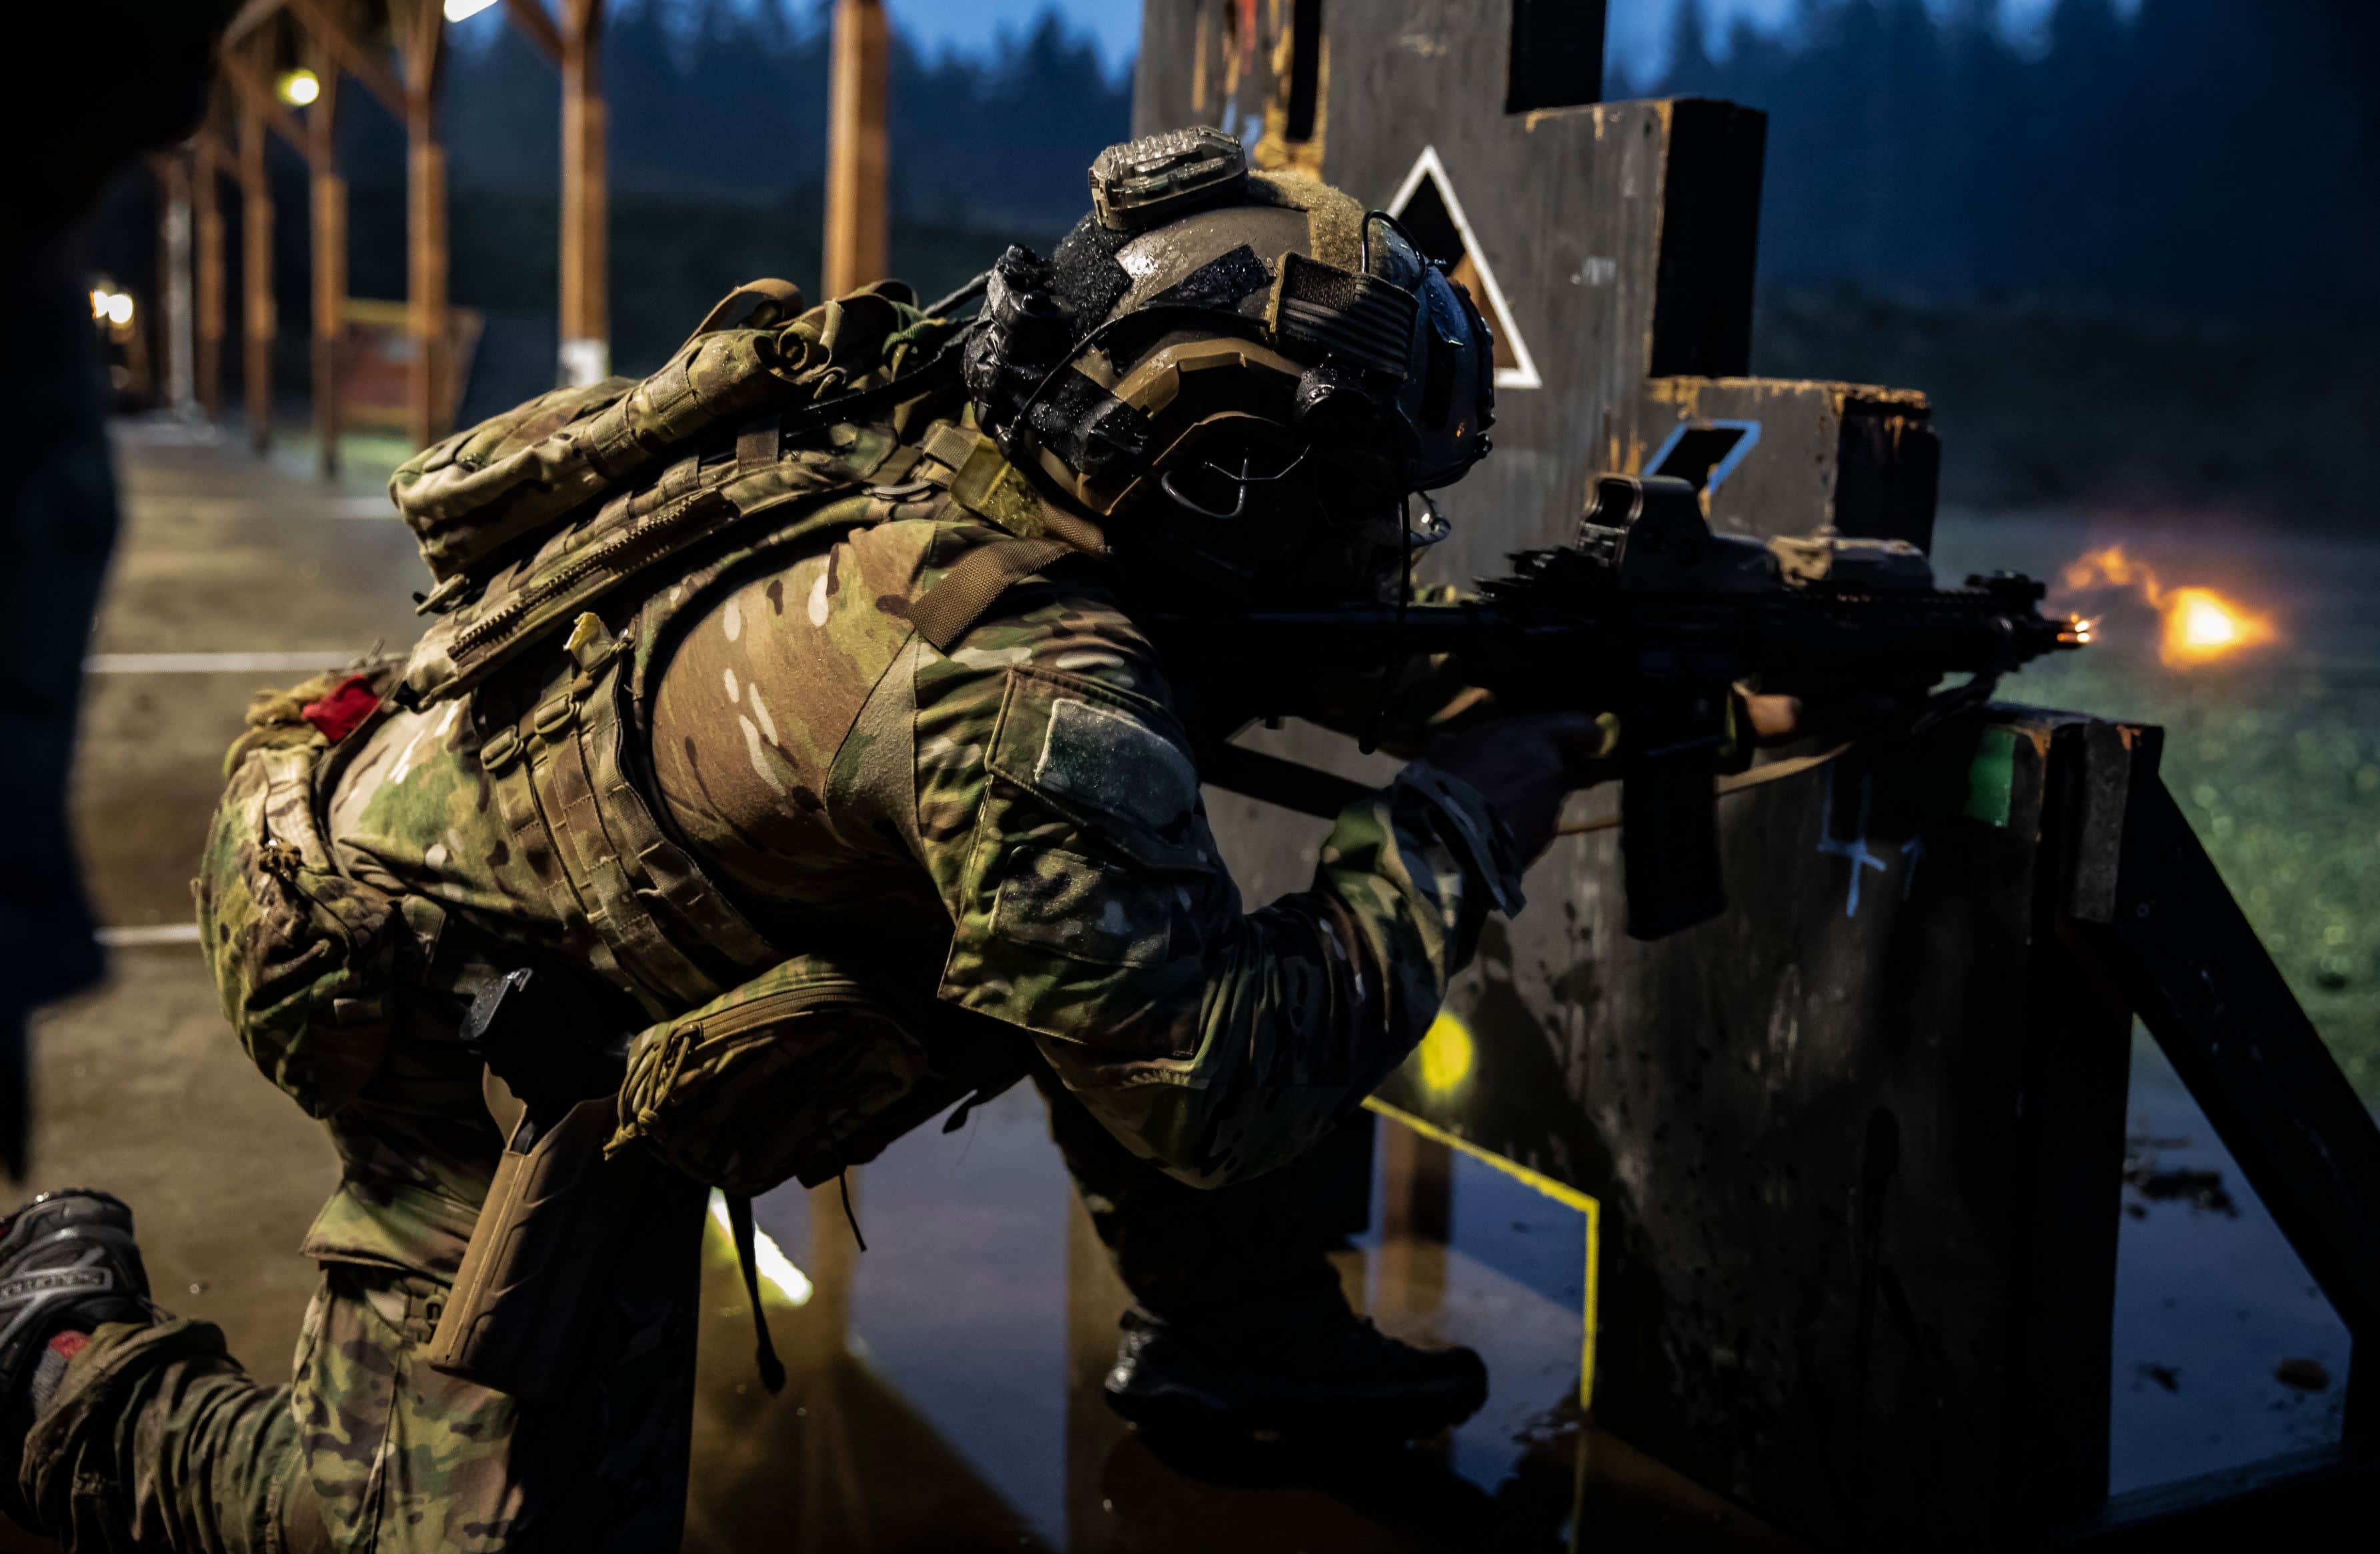 JOINT BASE LEWIS-MCCHORD, Wash. – A Green Beret with 1st Special Forces Group (Airborne) fires his weapon during the stress shoot phase of the Menton Week team competition at Joint Base Lewis-McChord, Wash